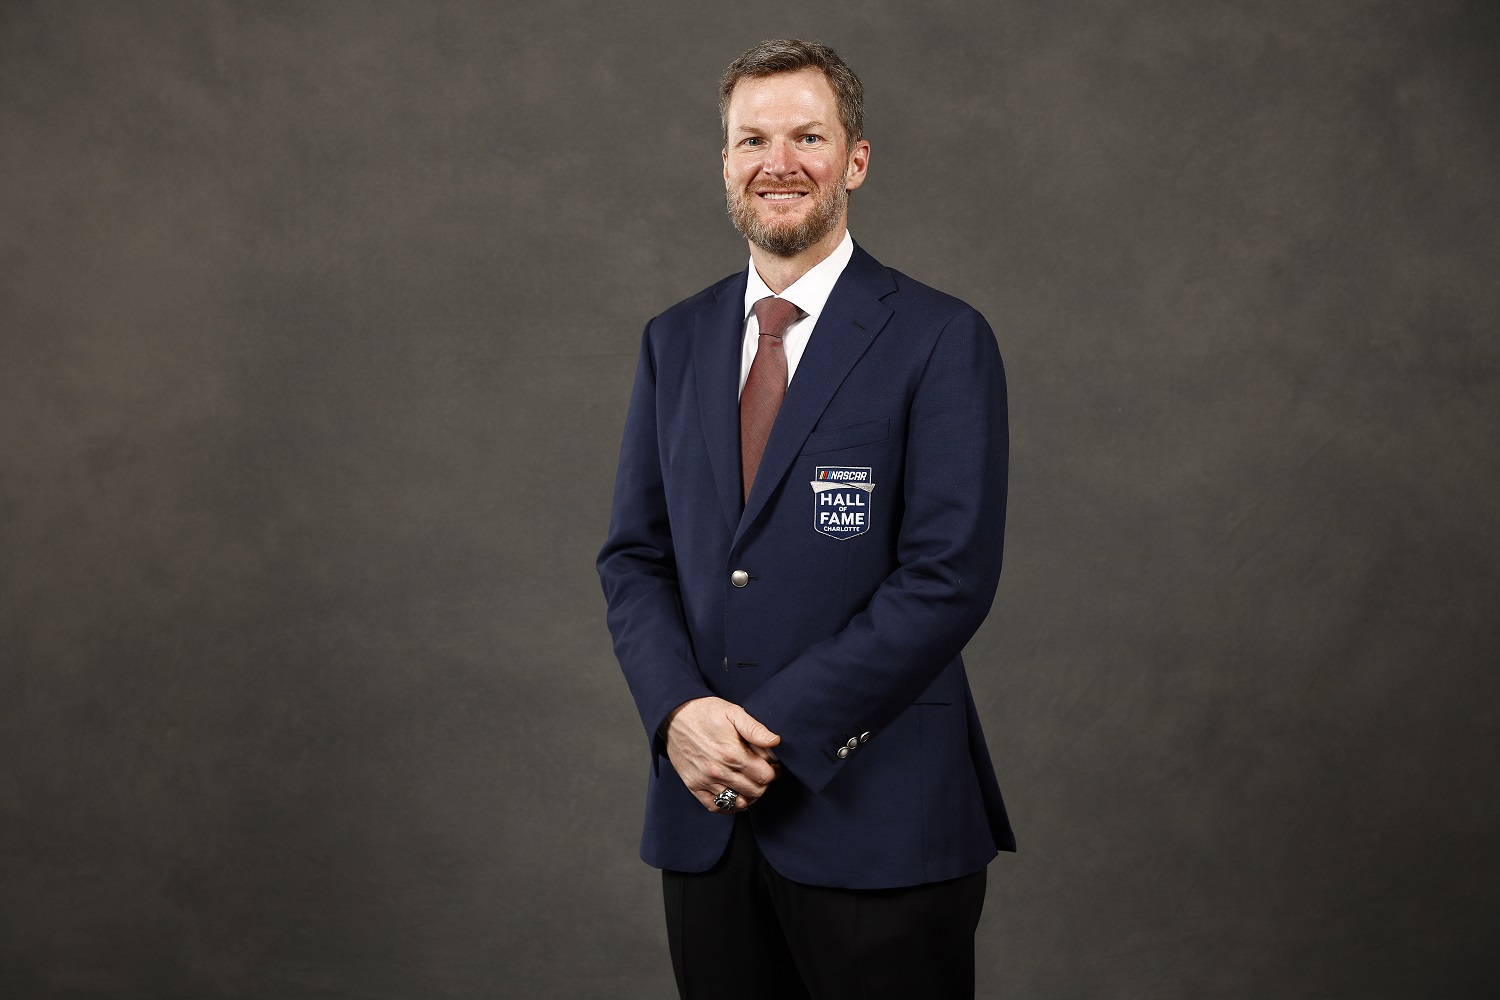 NASCAR Hall of Fame inductee Dale Earnhardt Jr. poses for a portrait during the 2021 NASCAR Hall of Fame Induction Ceremony at NASCAR Hall of Fame on Jan. 21, 2022, in Charlotte, North Carolina.